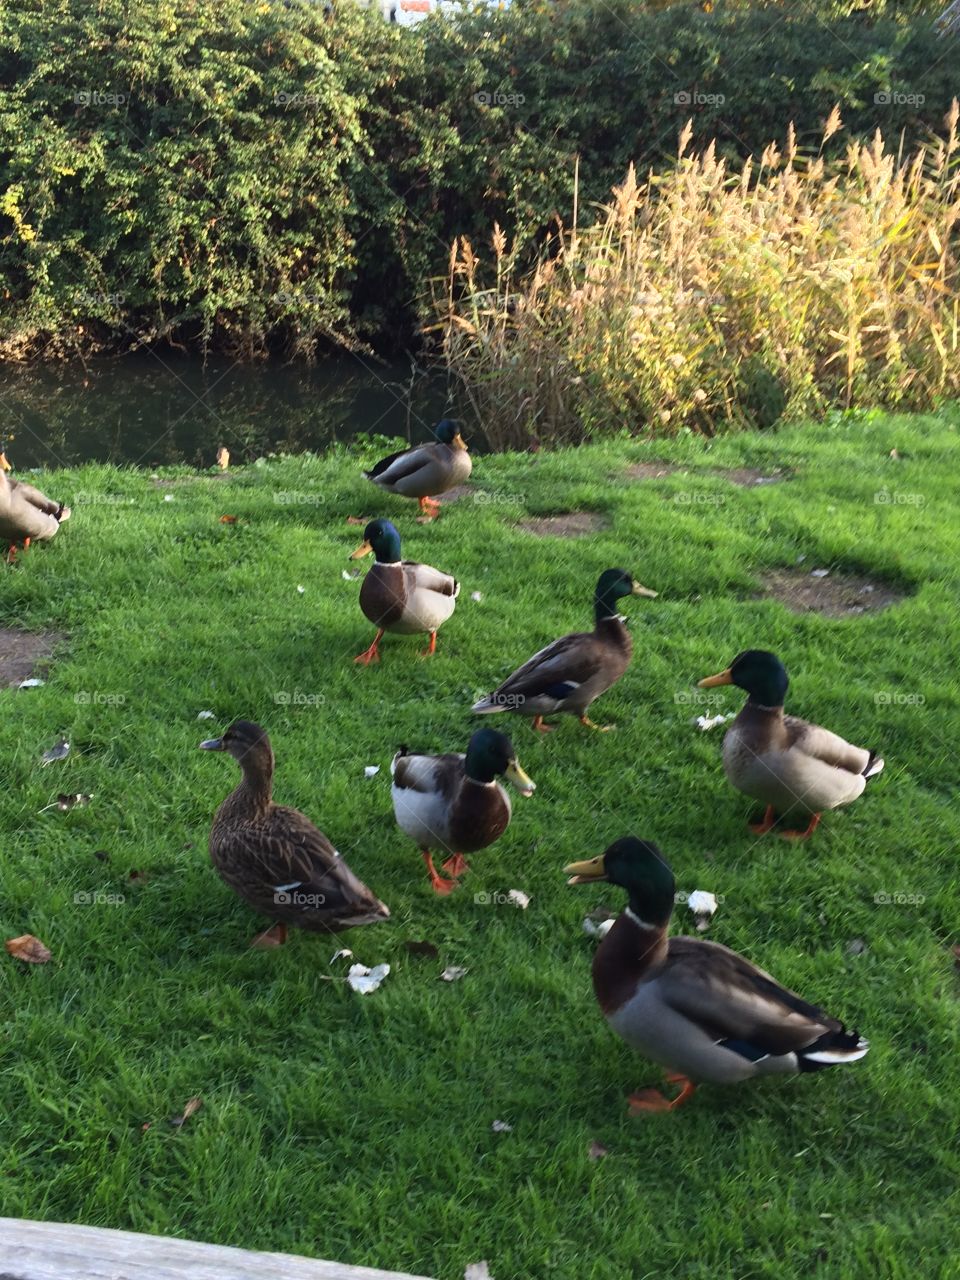 Shot of the ducks by the stream